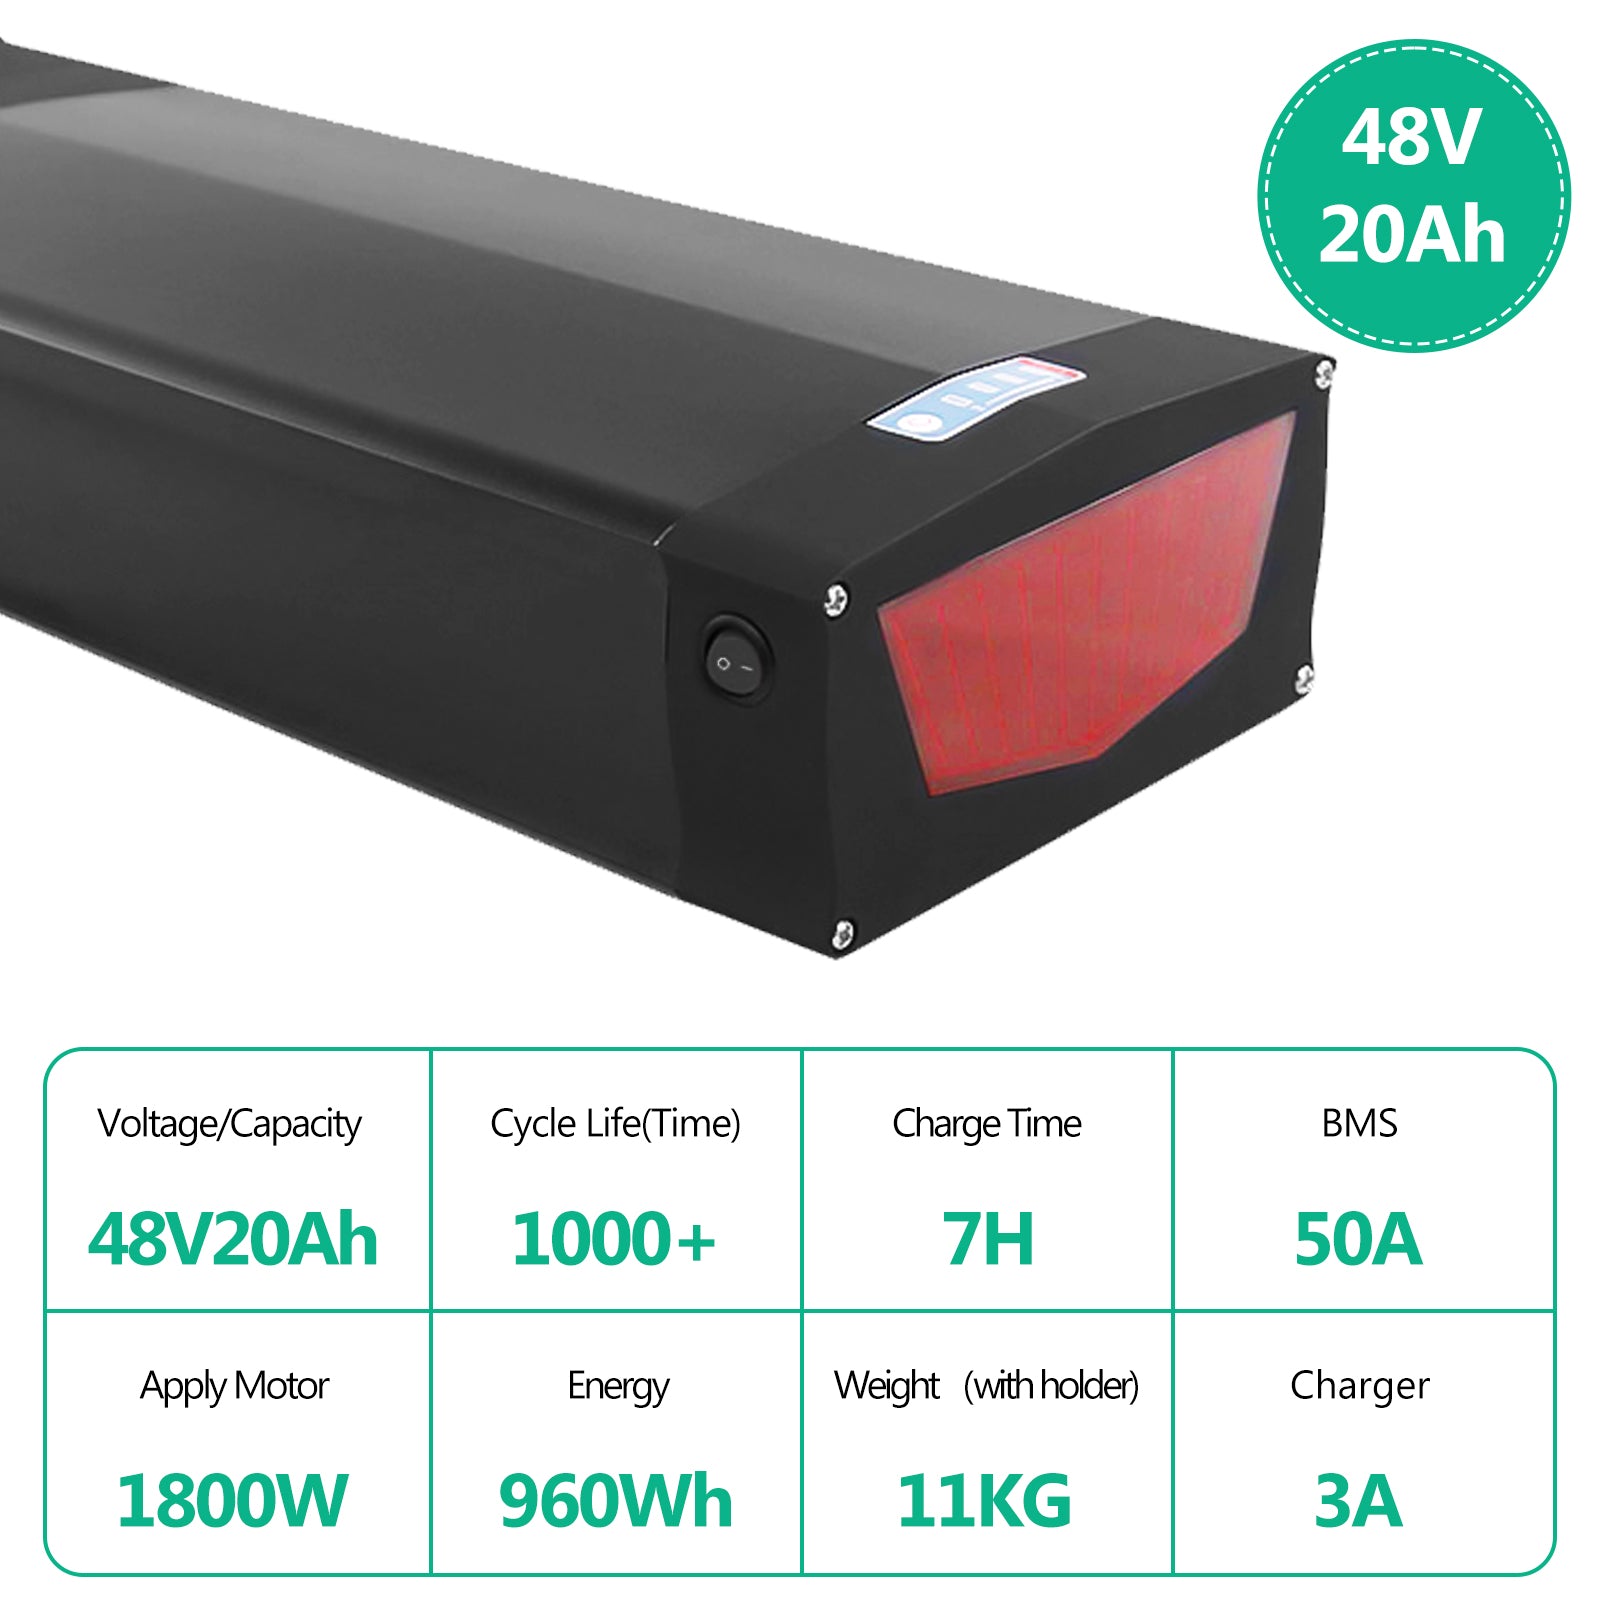 (BMS50A) Ebike Battery 48V 20AH Lithium Battery Pack for 1800W Motor, Rear Rack Electric bike battery with Rack, Charger